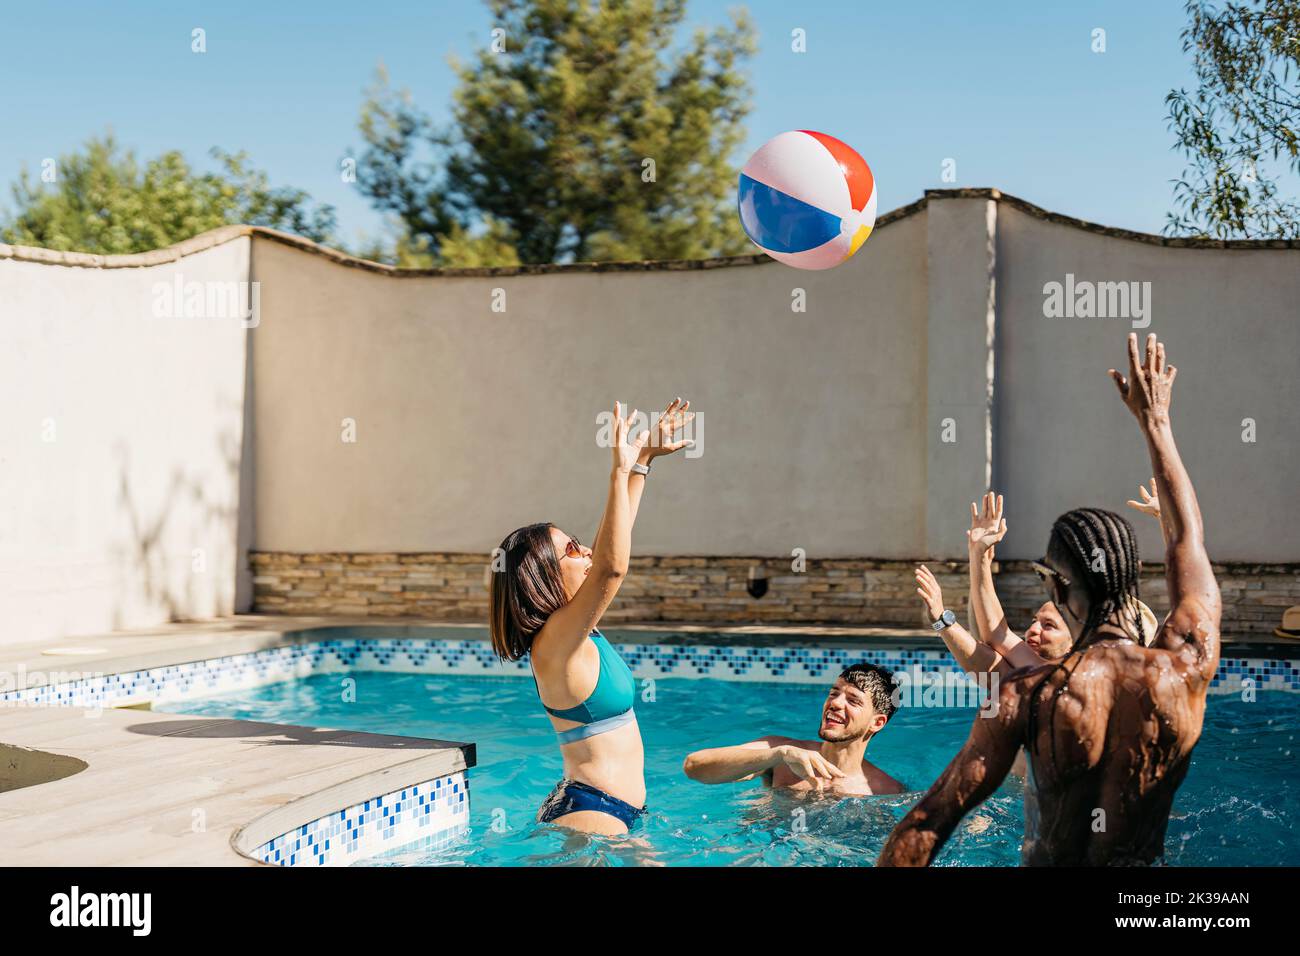 multi-ethnic group playing in a swimming pool with a ball Stock Photo